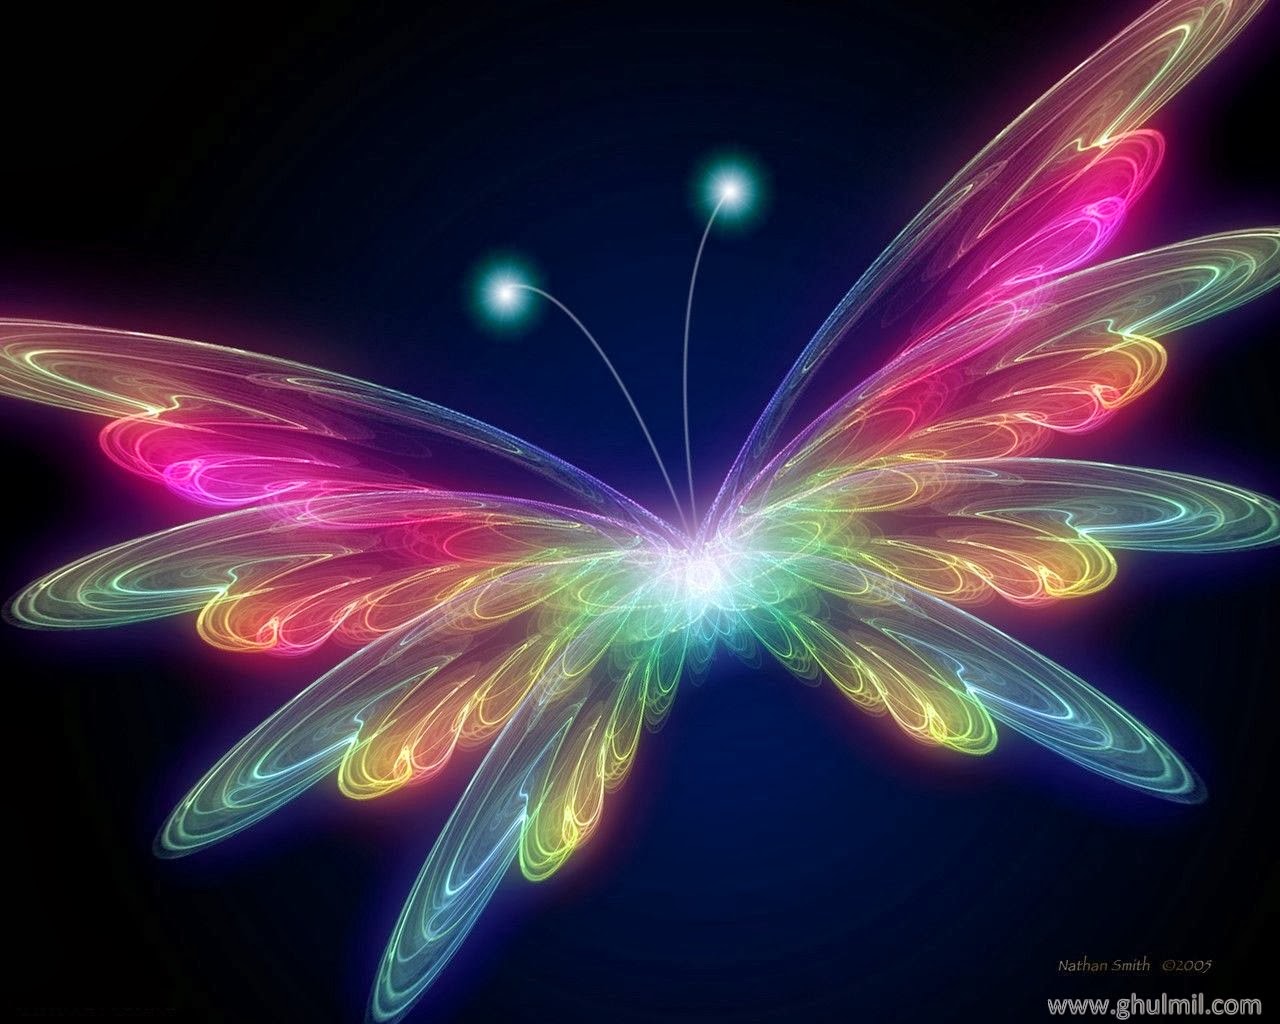 For Get Live Butterfly Wallpaper And Make This